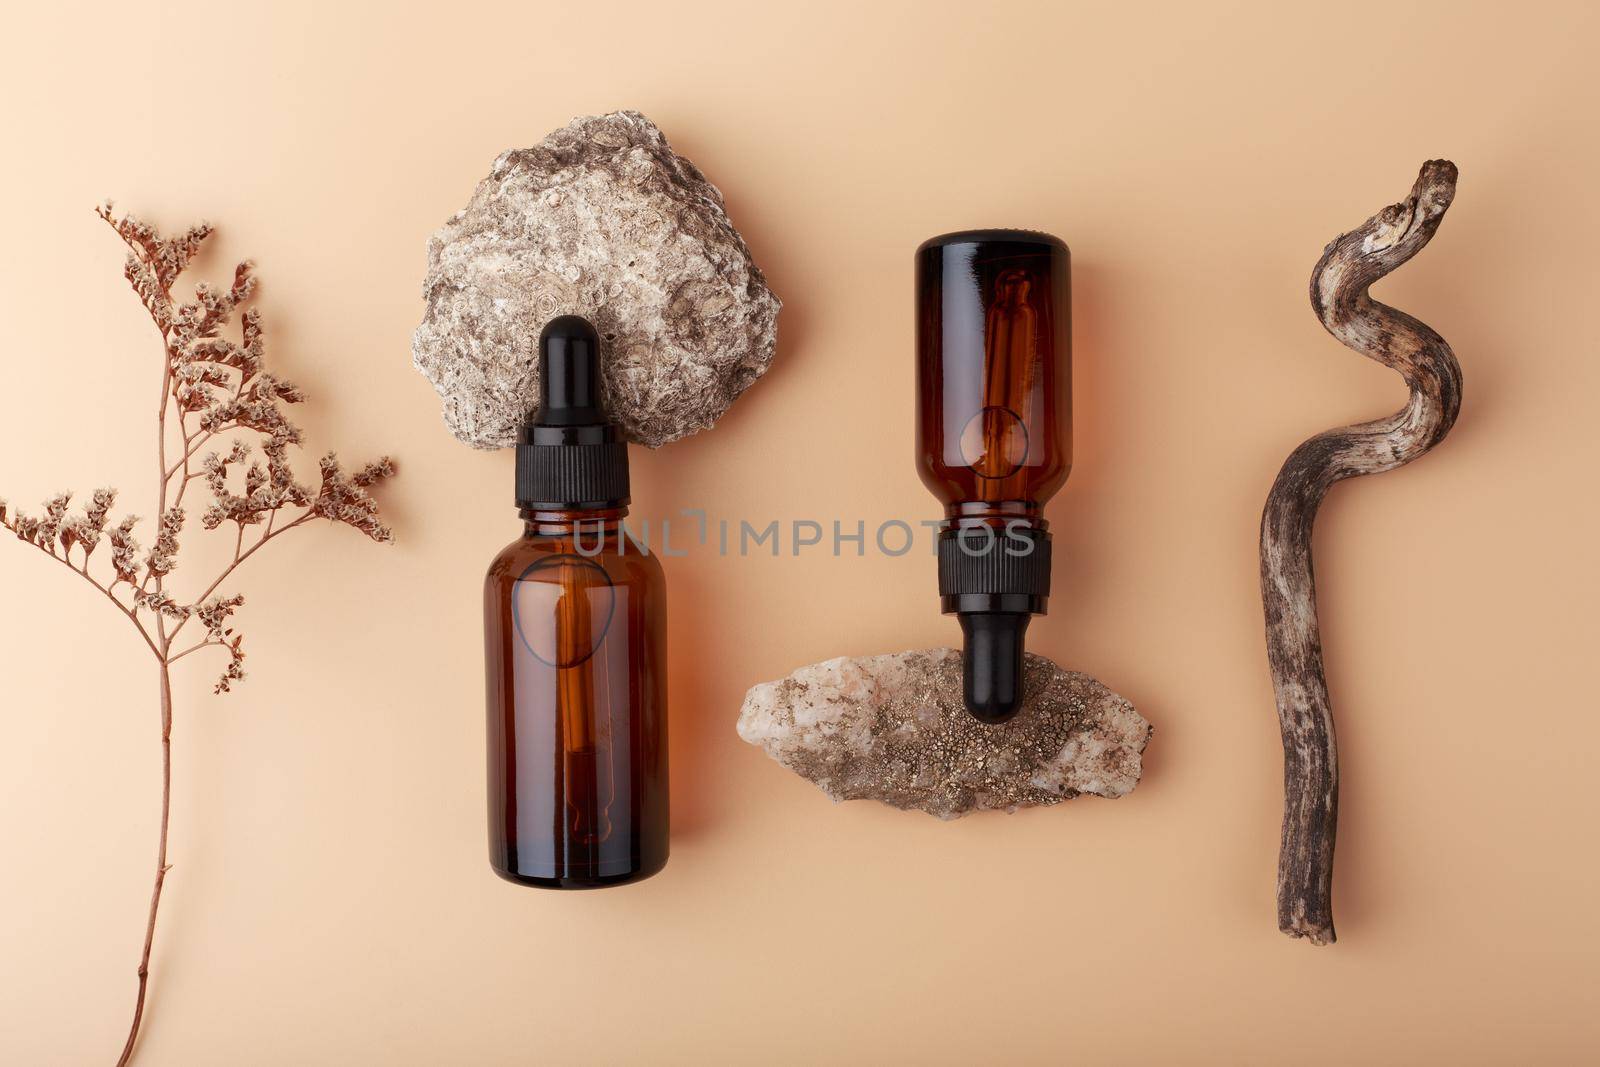 Top view of skin serums in dark bottles against beige background with stones and dry flowers by Senorina_Irina